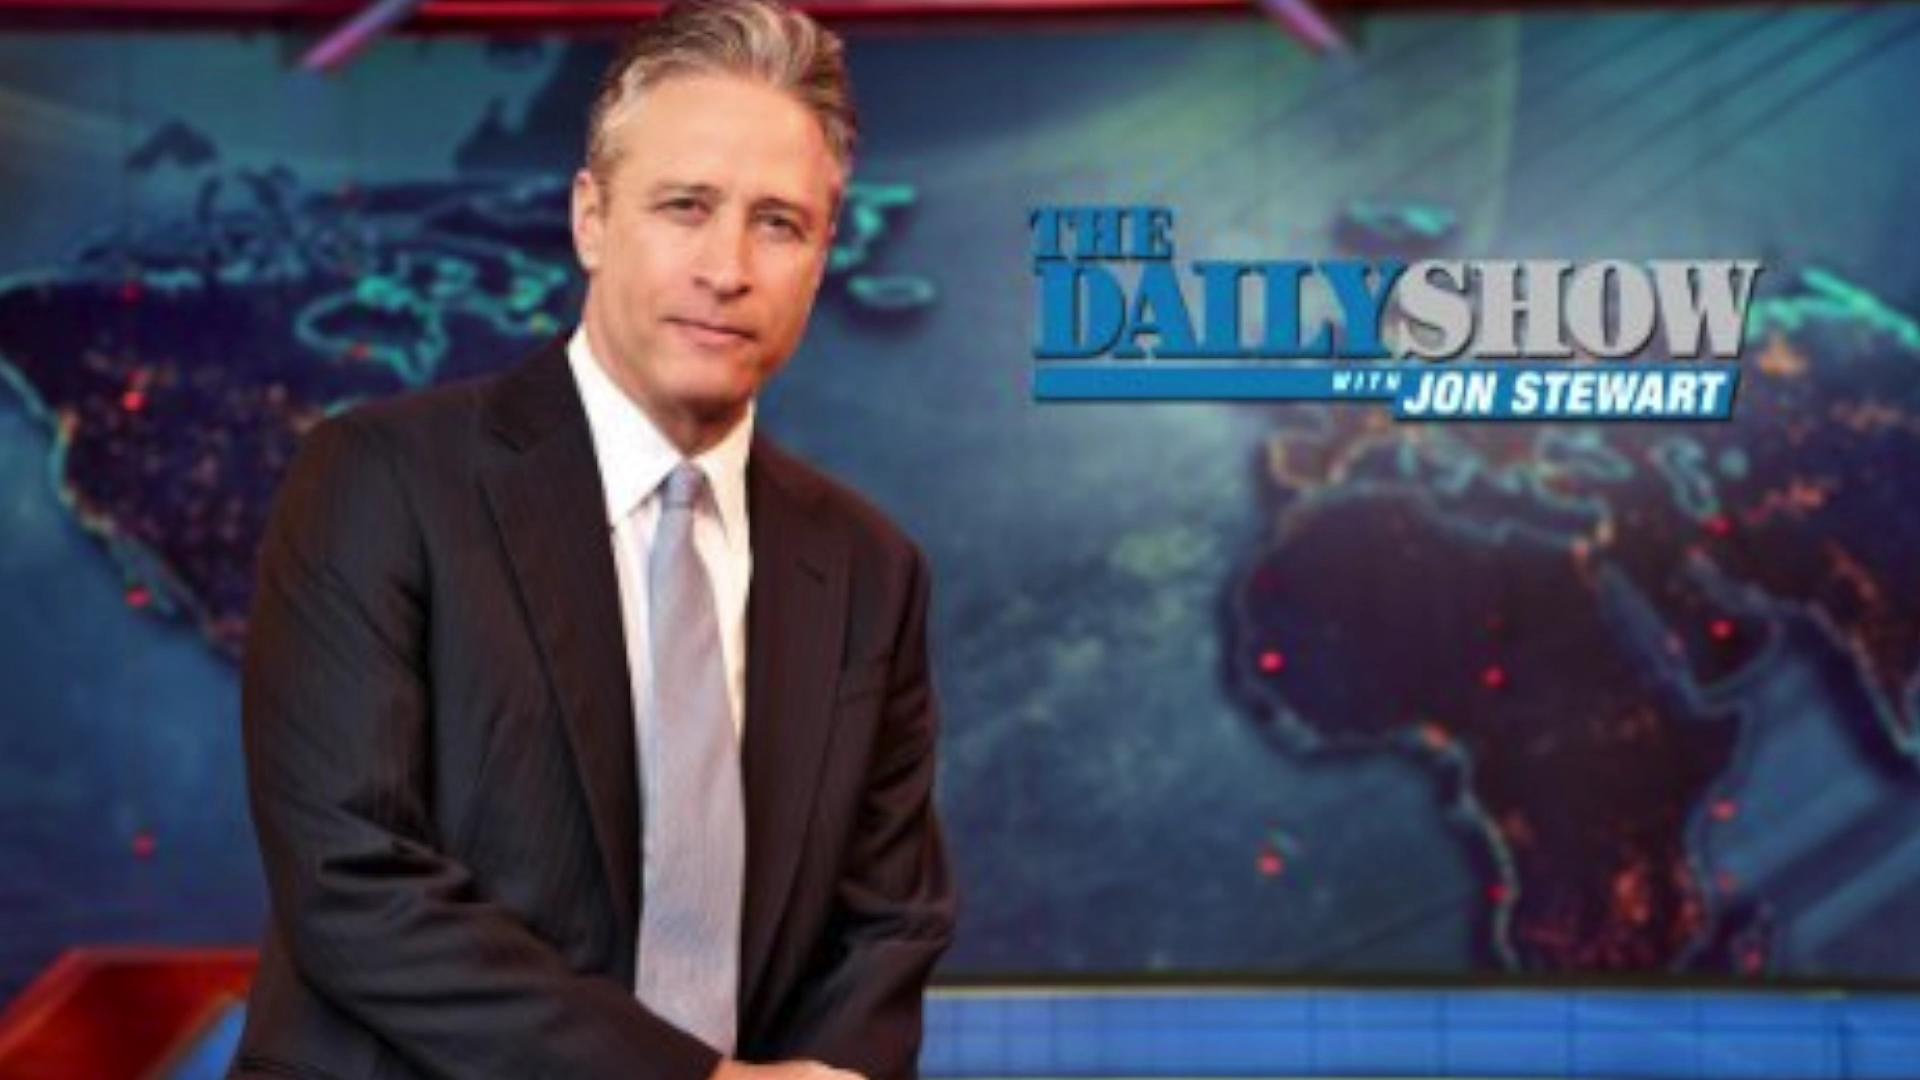 HD Quality Wallpaper | Collection: TV Show, 1920x1080 The Daily Show With Jon Stewart